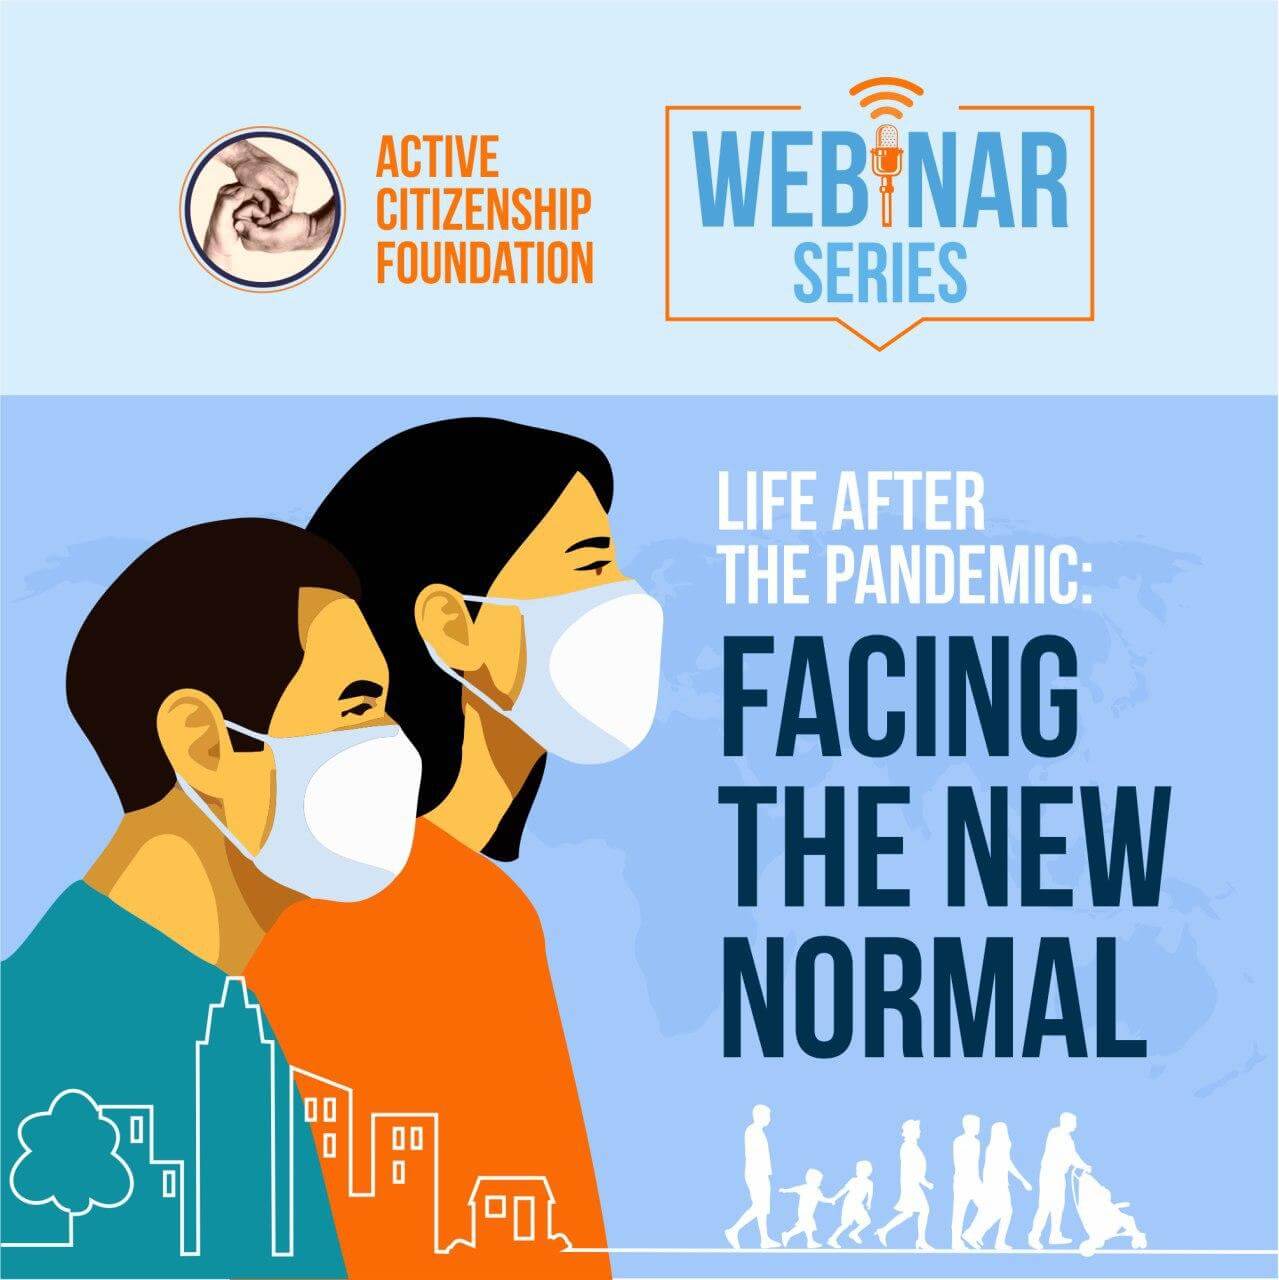 Facing the new Normal